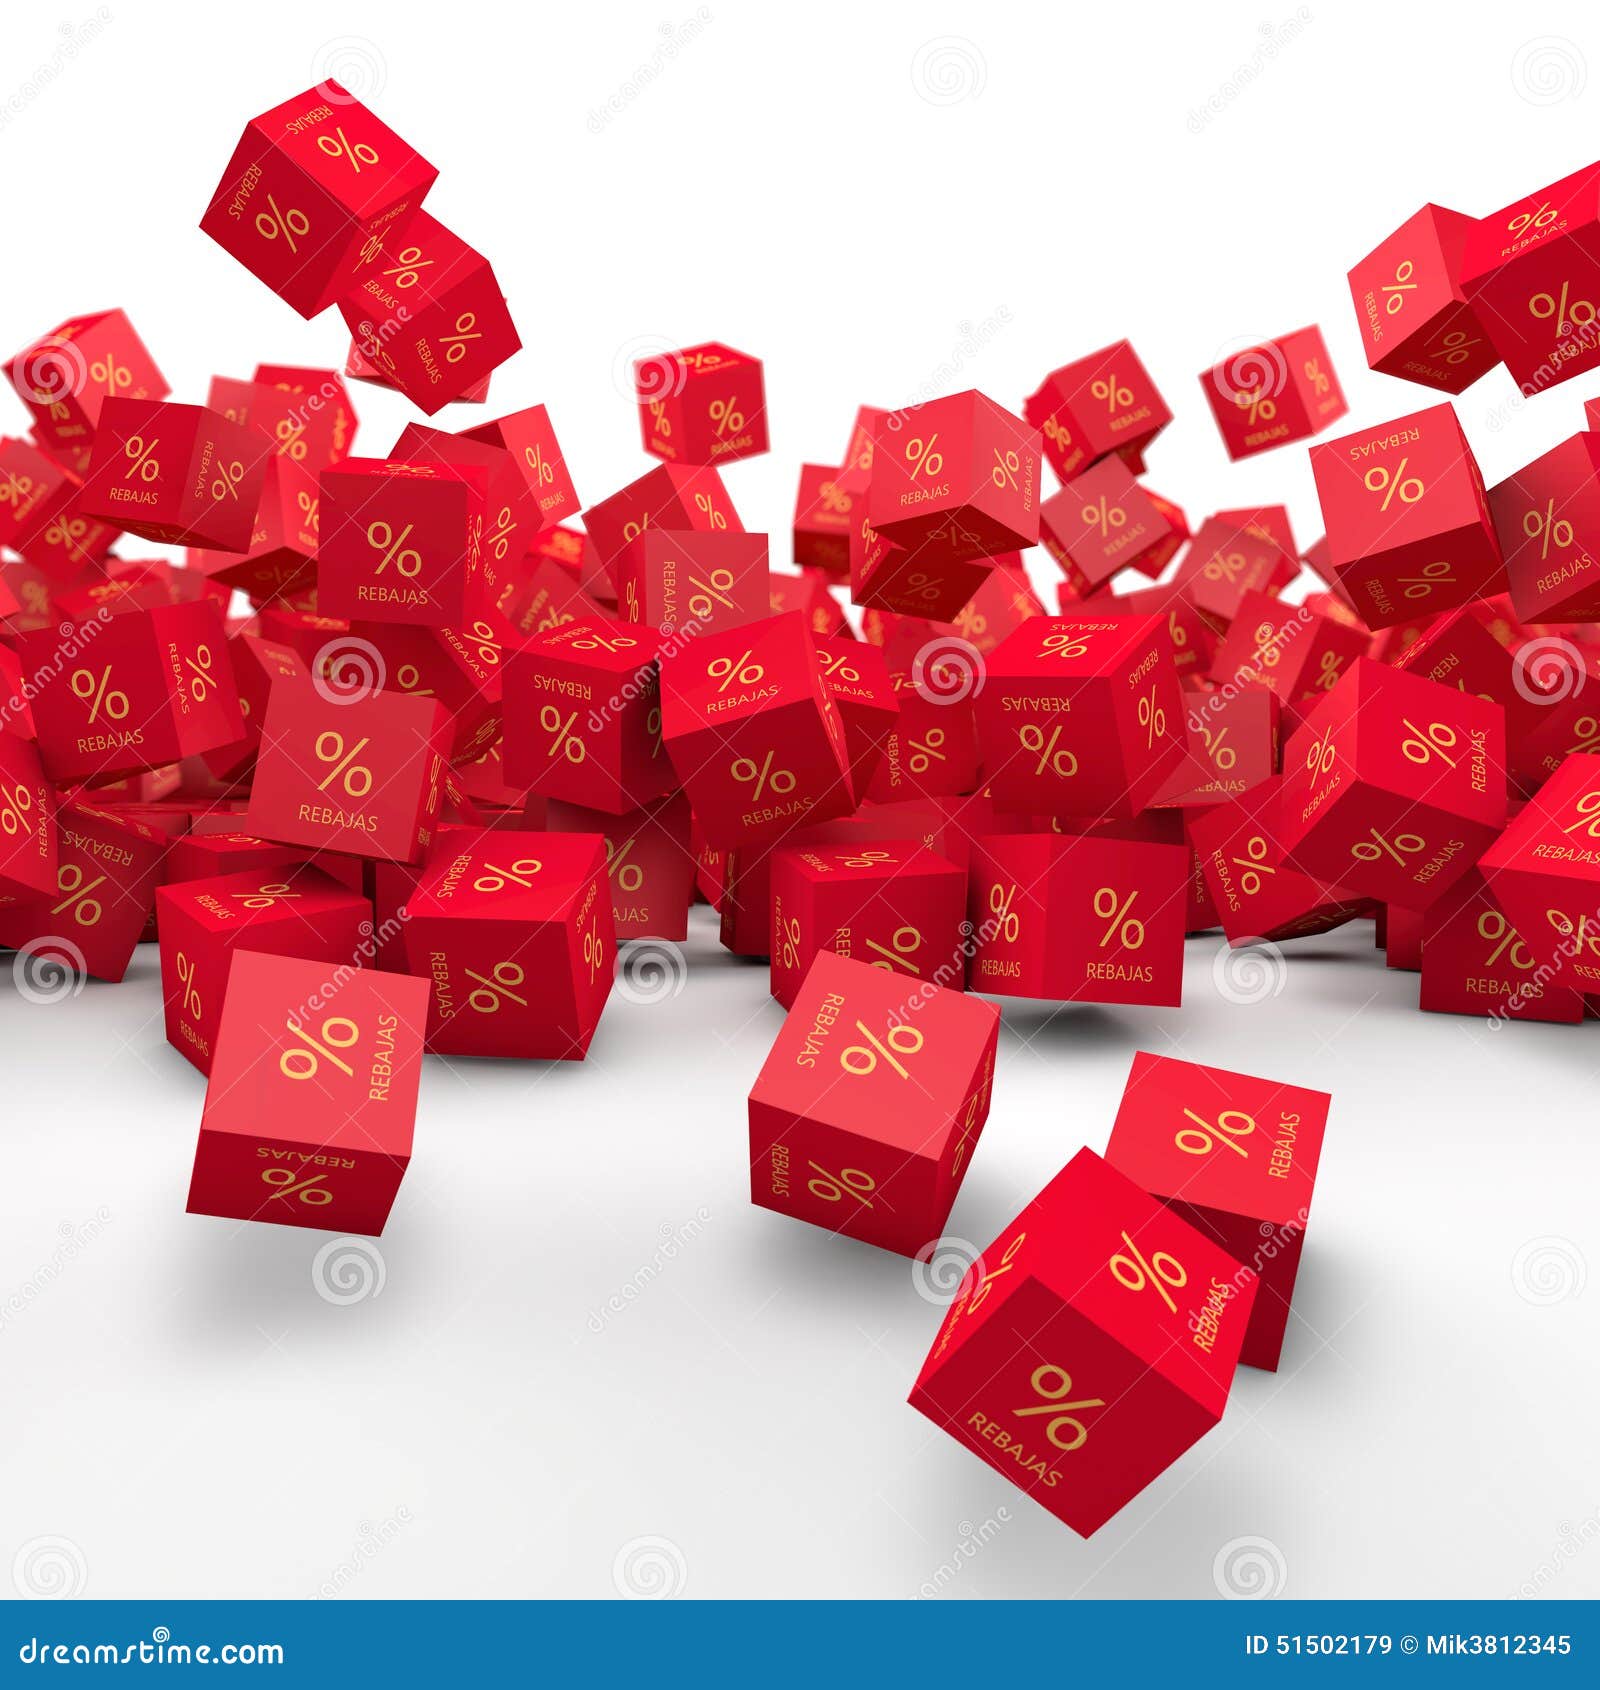 red cubes falling and discounts